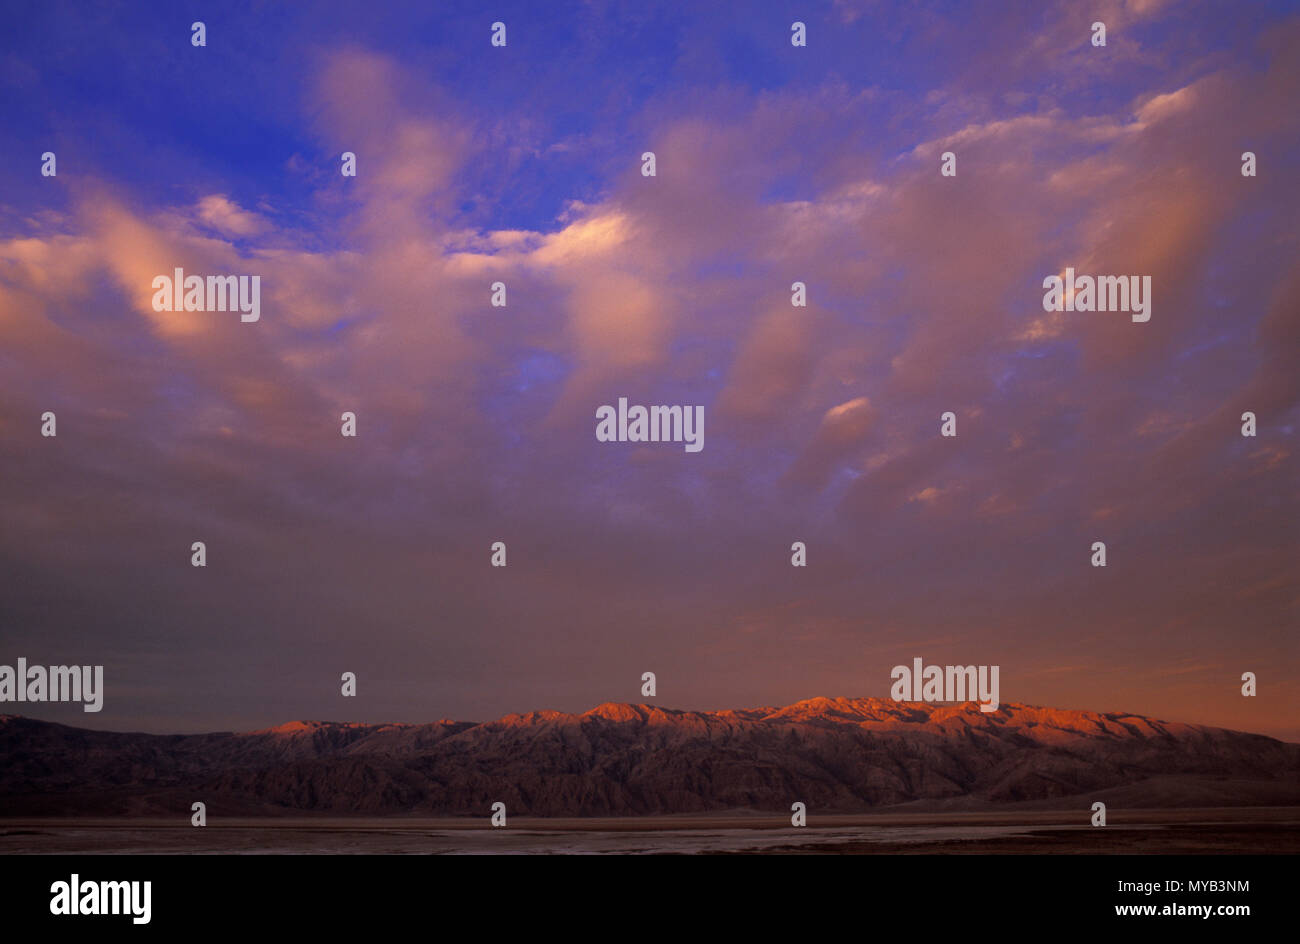 Sunrise in Death Valley, with sun just reaching mountain range with dramatic cloud pattern, Death Valley, CA, USA Stock Photo